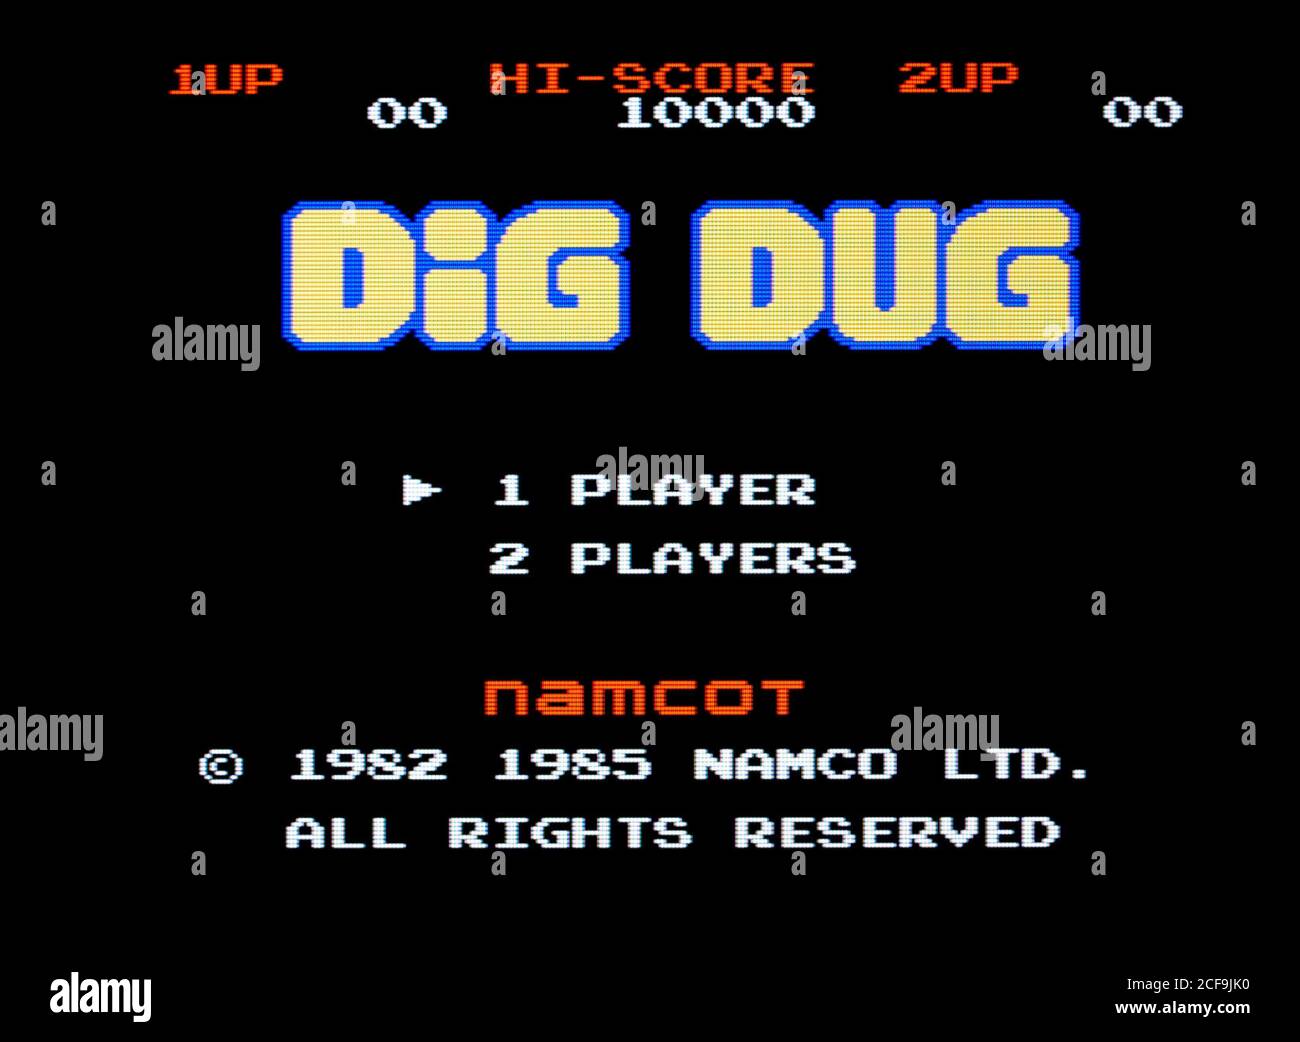 Dig Dug - Nintendo Entertainment System - NES Videogame - Editorial use  only Stock Photo - Alamy